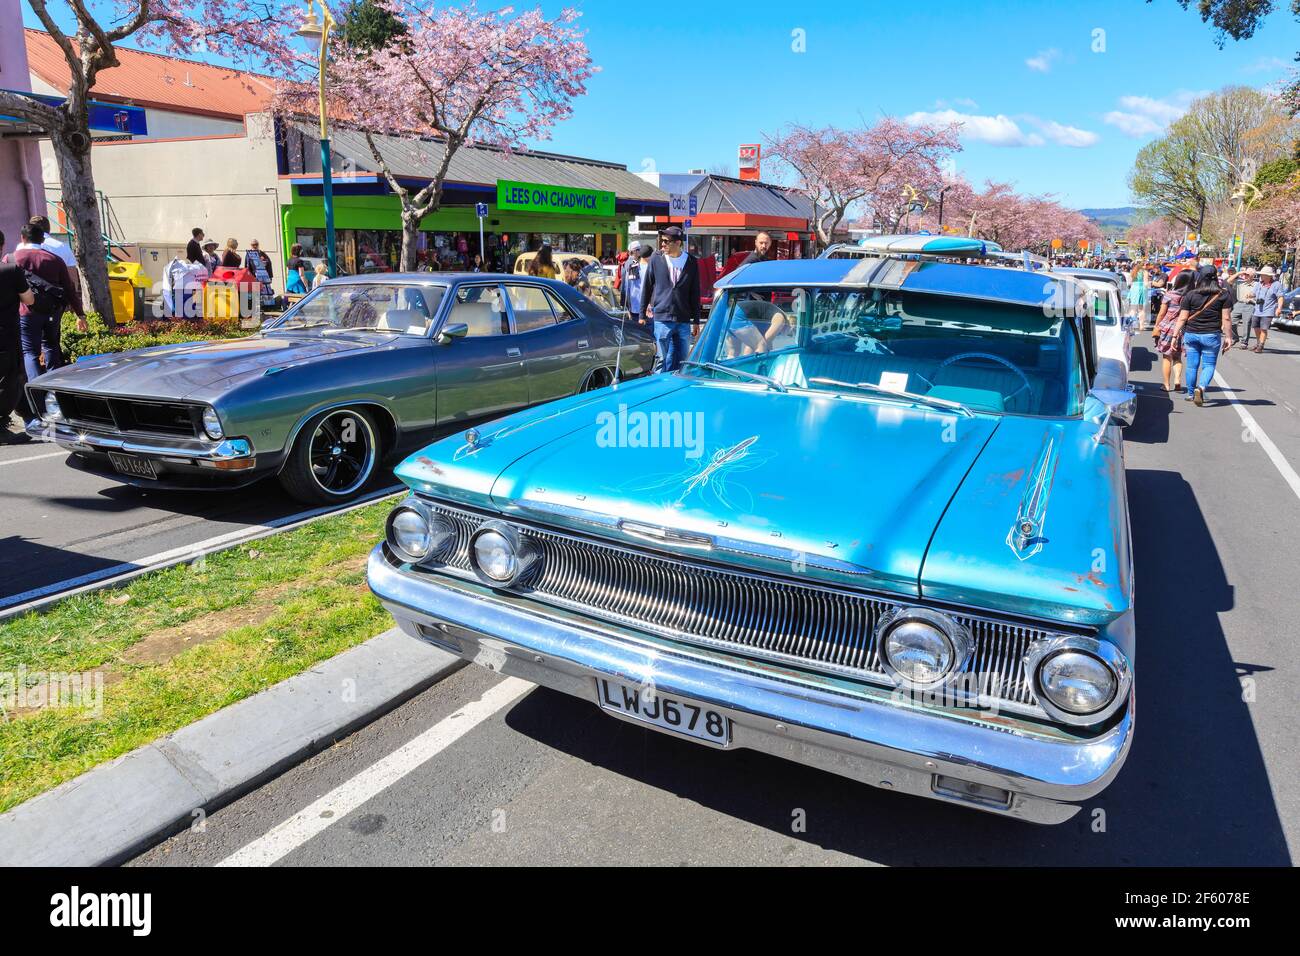 Classic cars at an outdoor car show. A blue 1960 Mercury Commuter next to a purple 1973 Ford Fairmont Stock Photo